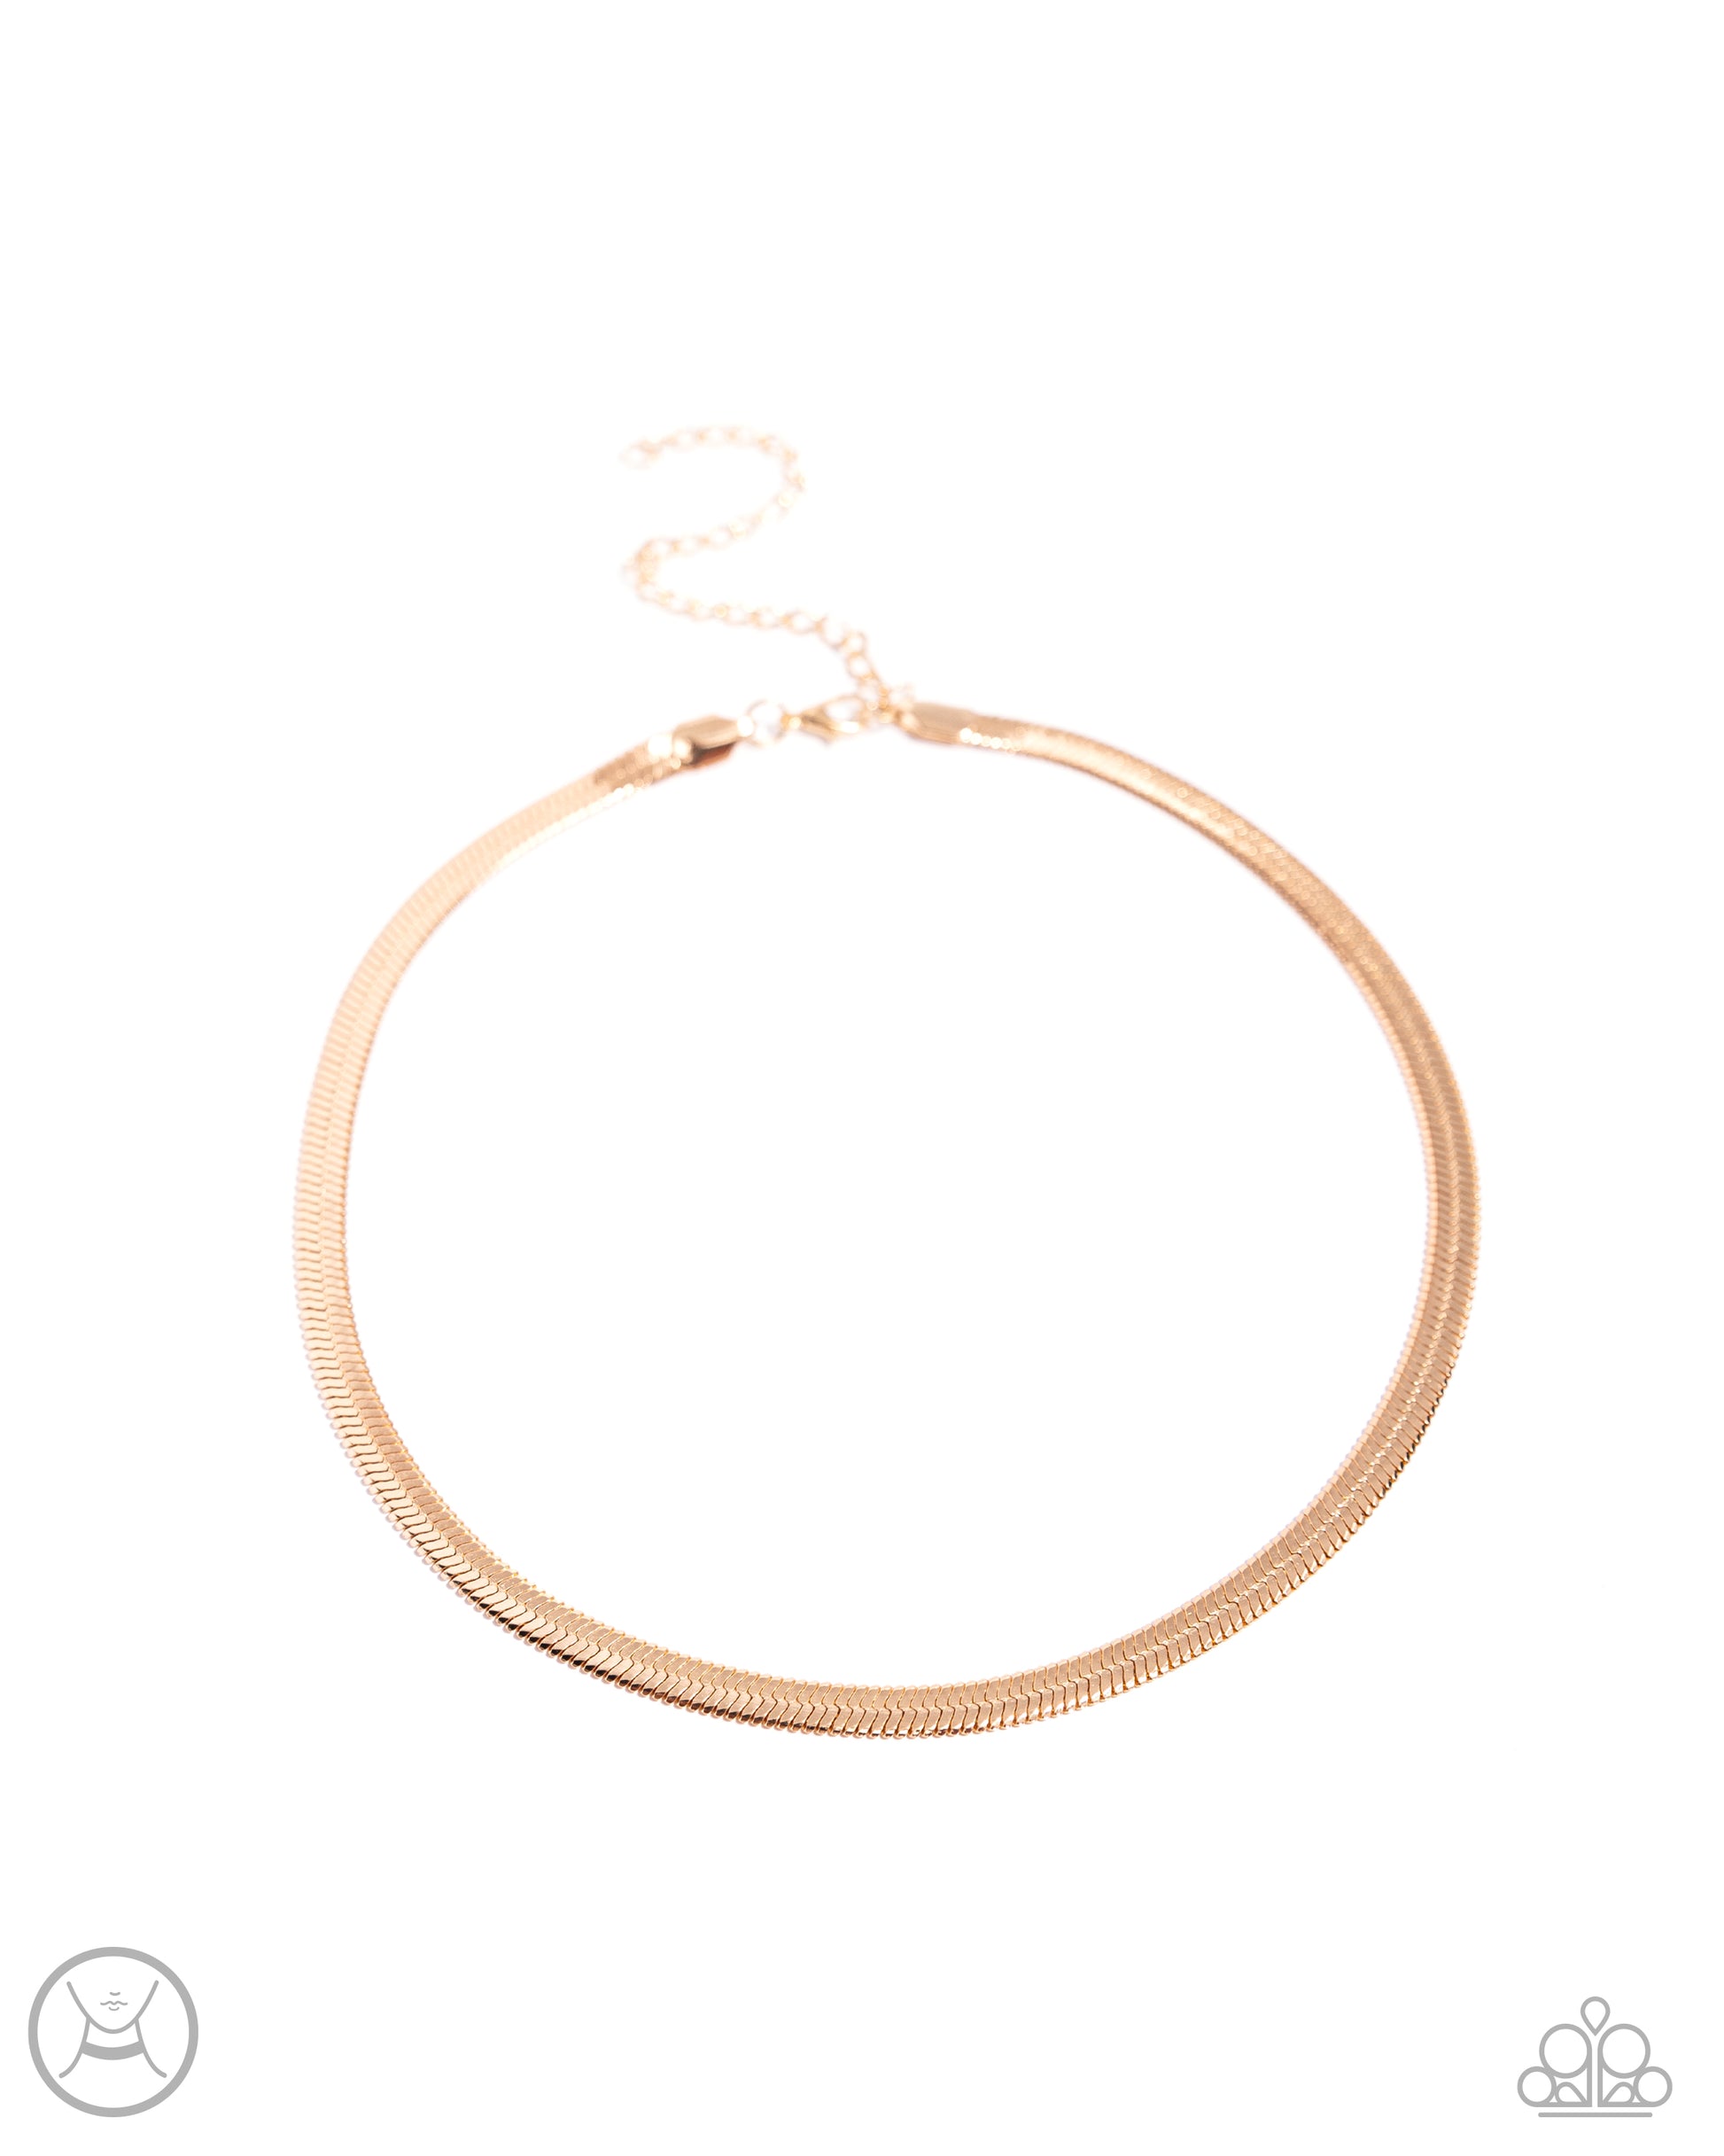 <p data-mce-fragment="1">Paparazzi Accessories - Musings Moment - Gold Choker Necklaces featuring a sleek gold finish, a herringbone chain loops below the collar for a bold basic. Features an adjustable clasp closure.</p> <p data-mce-fragment="1"><i data-mce-fragment="1">Sold as one individual choker necklace. Includes one pair of matching earrings.</i></p>